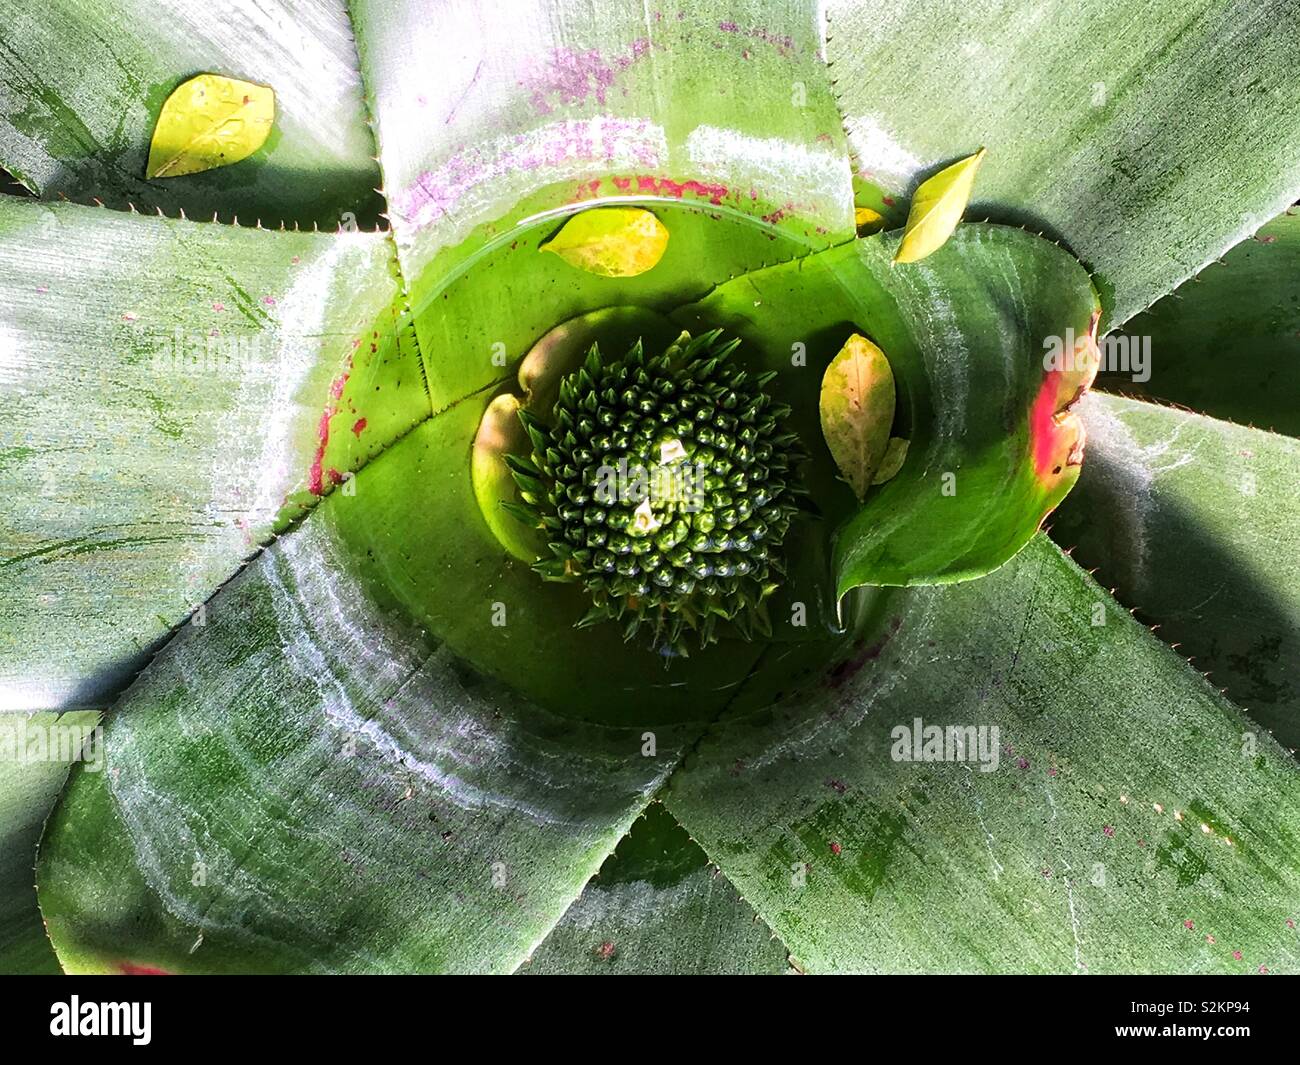 Perfect bromeliad plant with small white flowers. Stock Photo